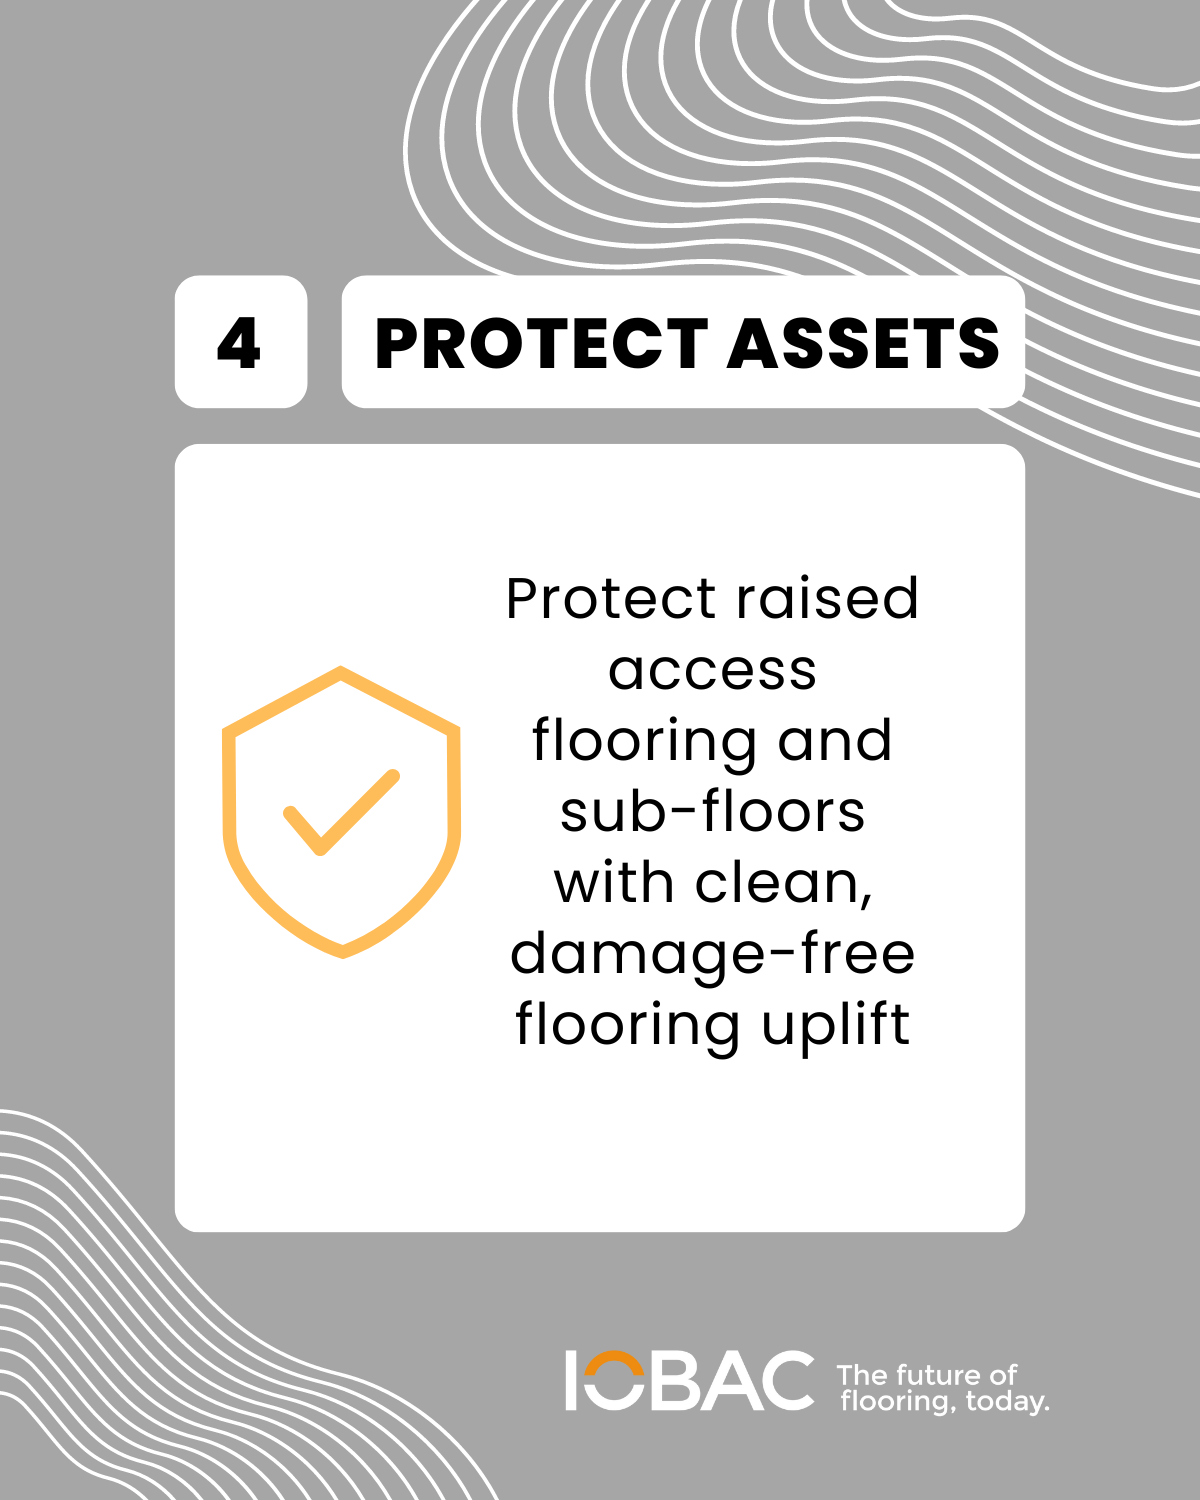 Reasons to Specify Adhesive-free Flooring - Asset Protection